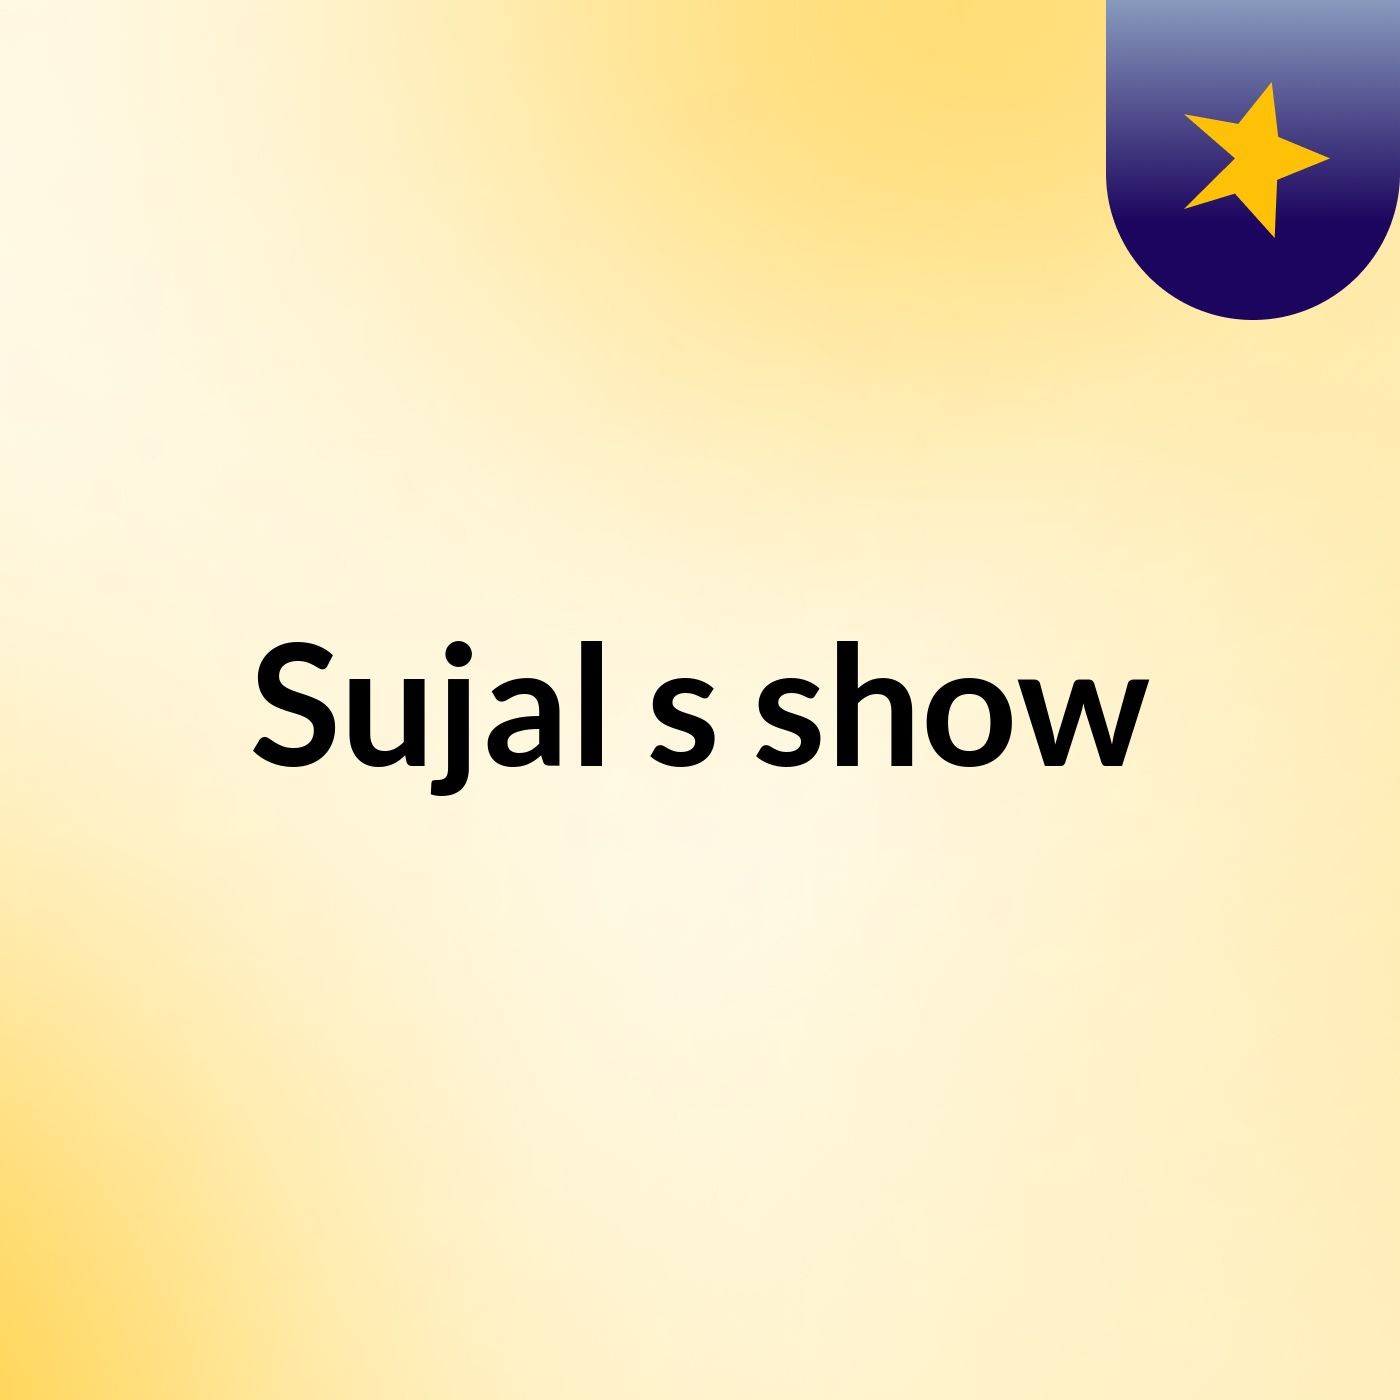 Sujal's show